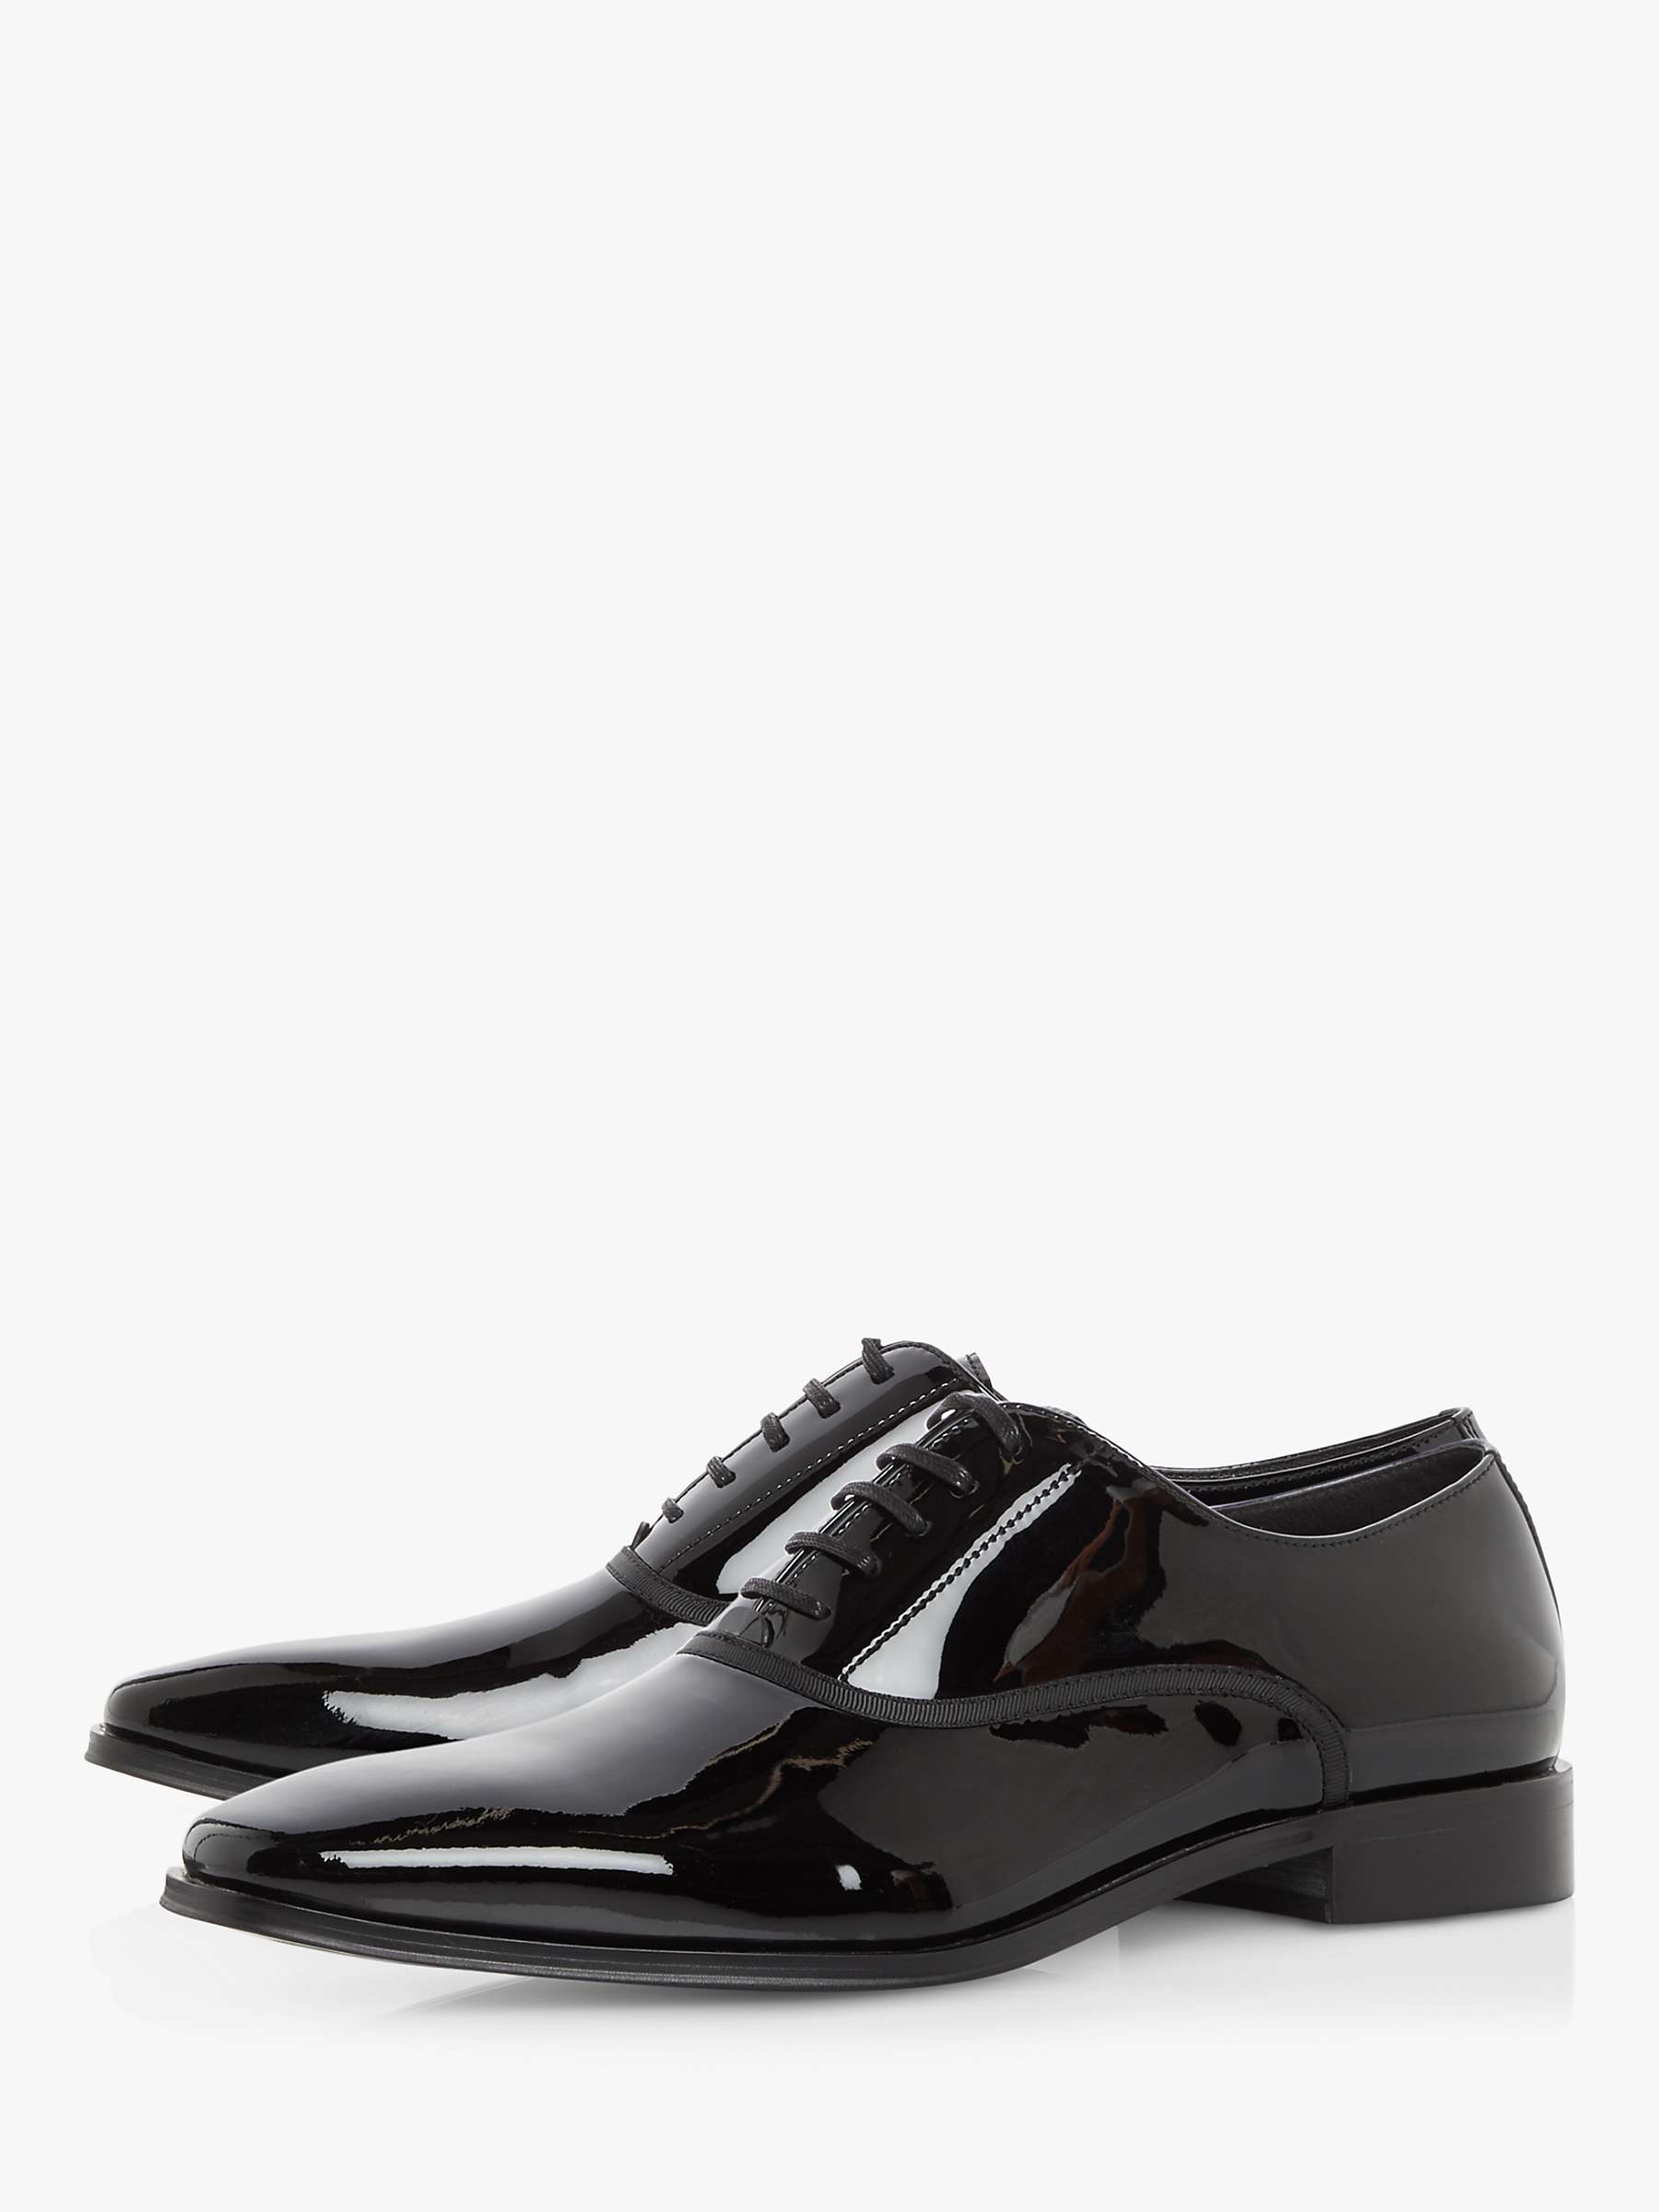 Buy Dune Swan Patent Leather Oxford Shoes, Black Online at johnlewis.com